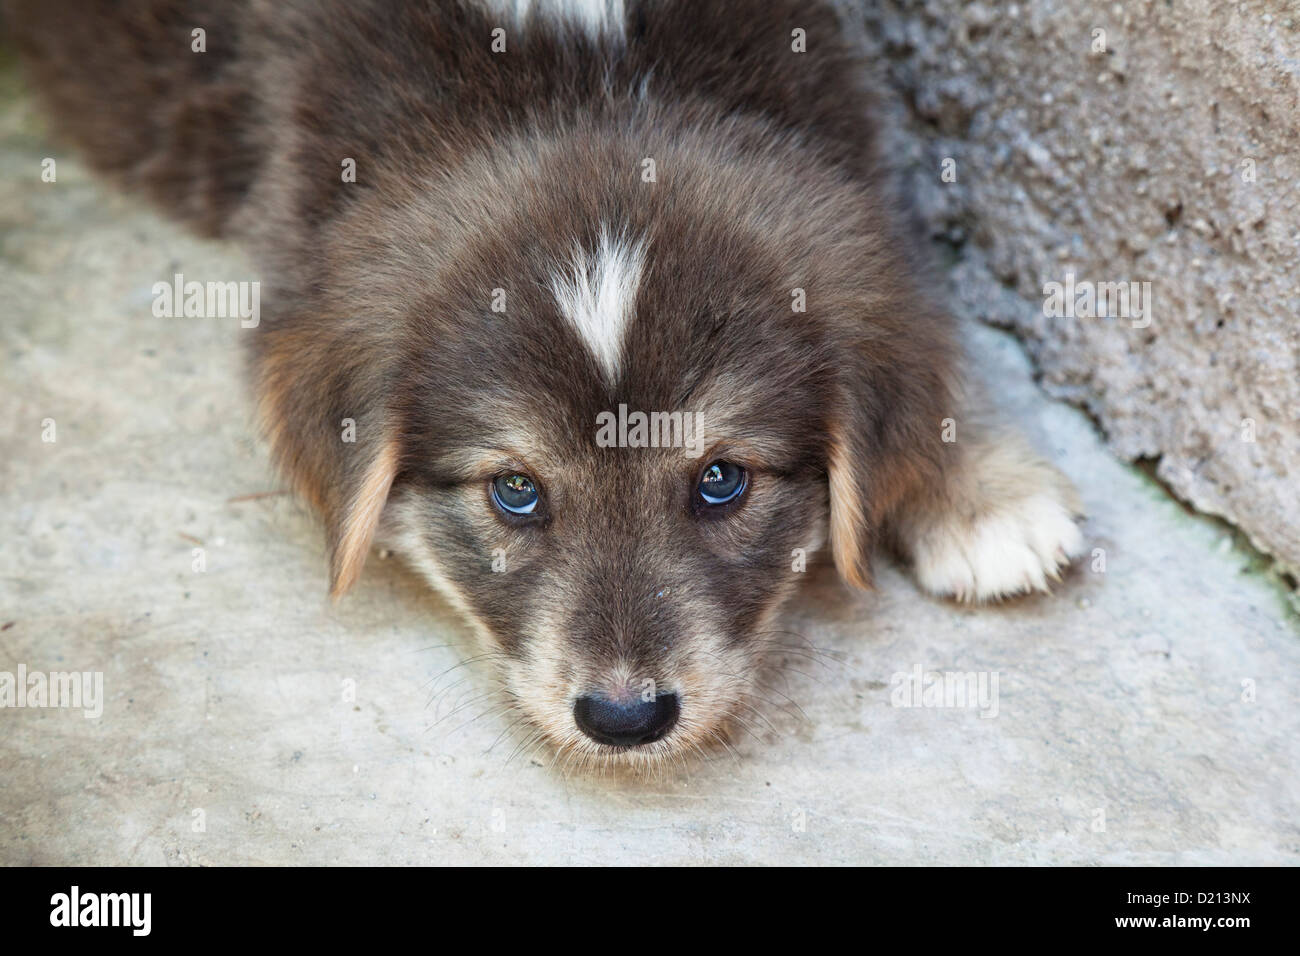 Young dog, puppy looking up, Turkey Stock Photo